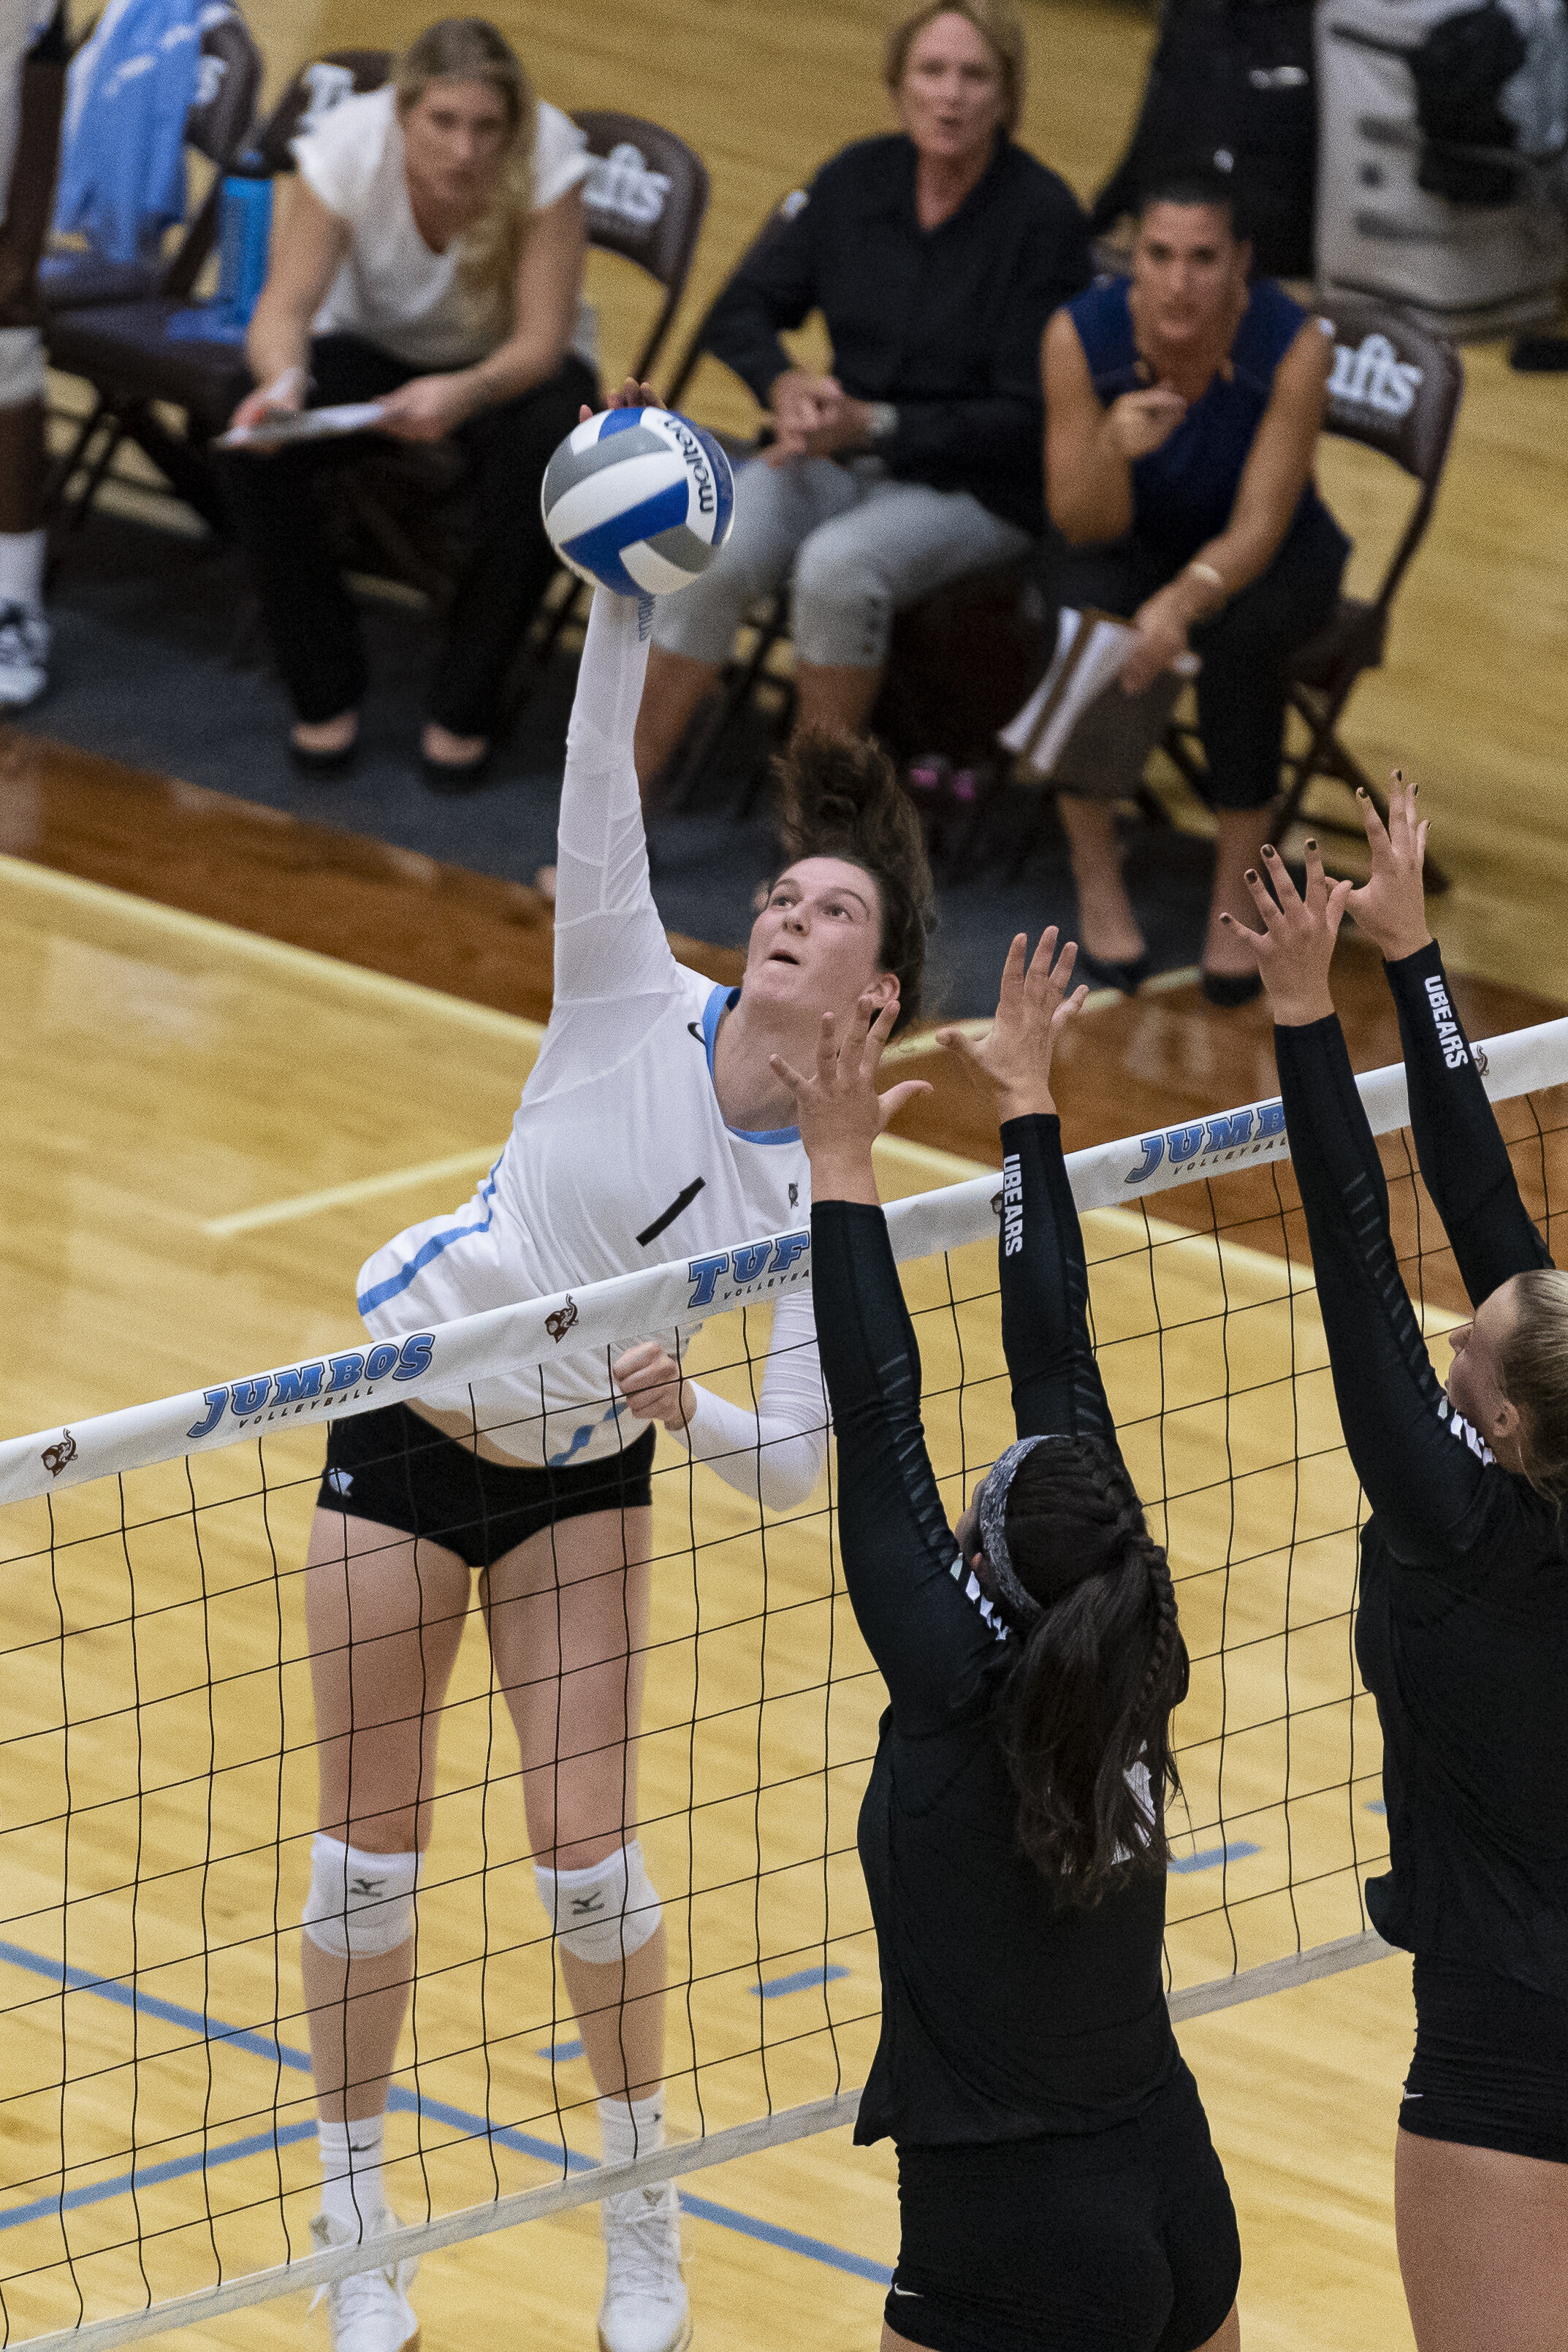 tufts_womans_volleyball -2.jpg